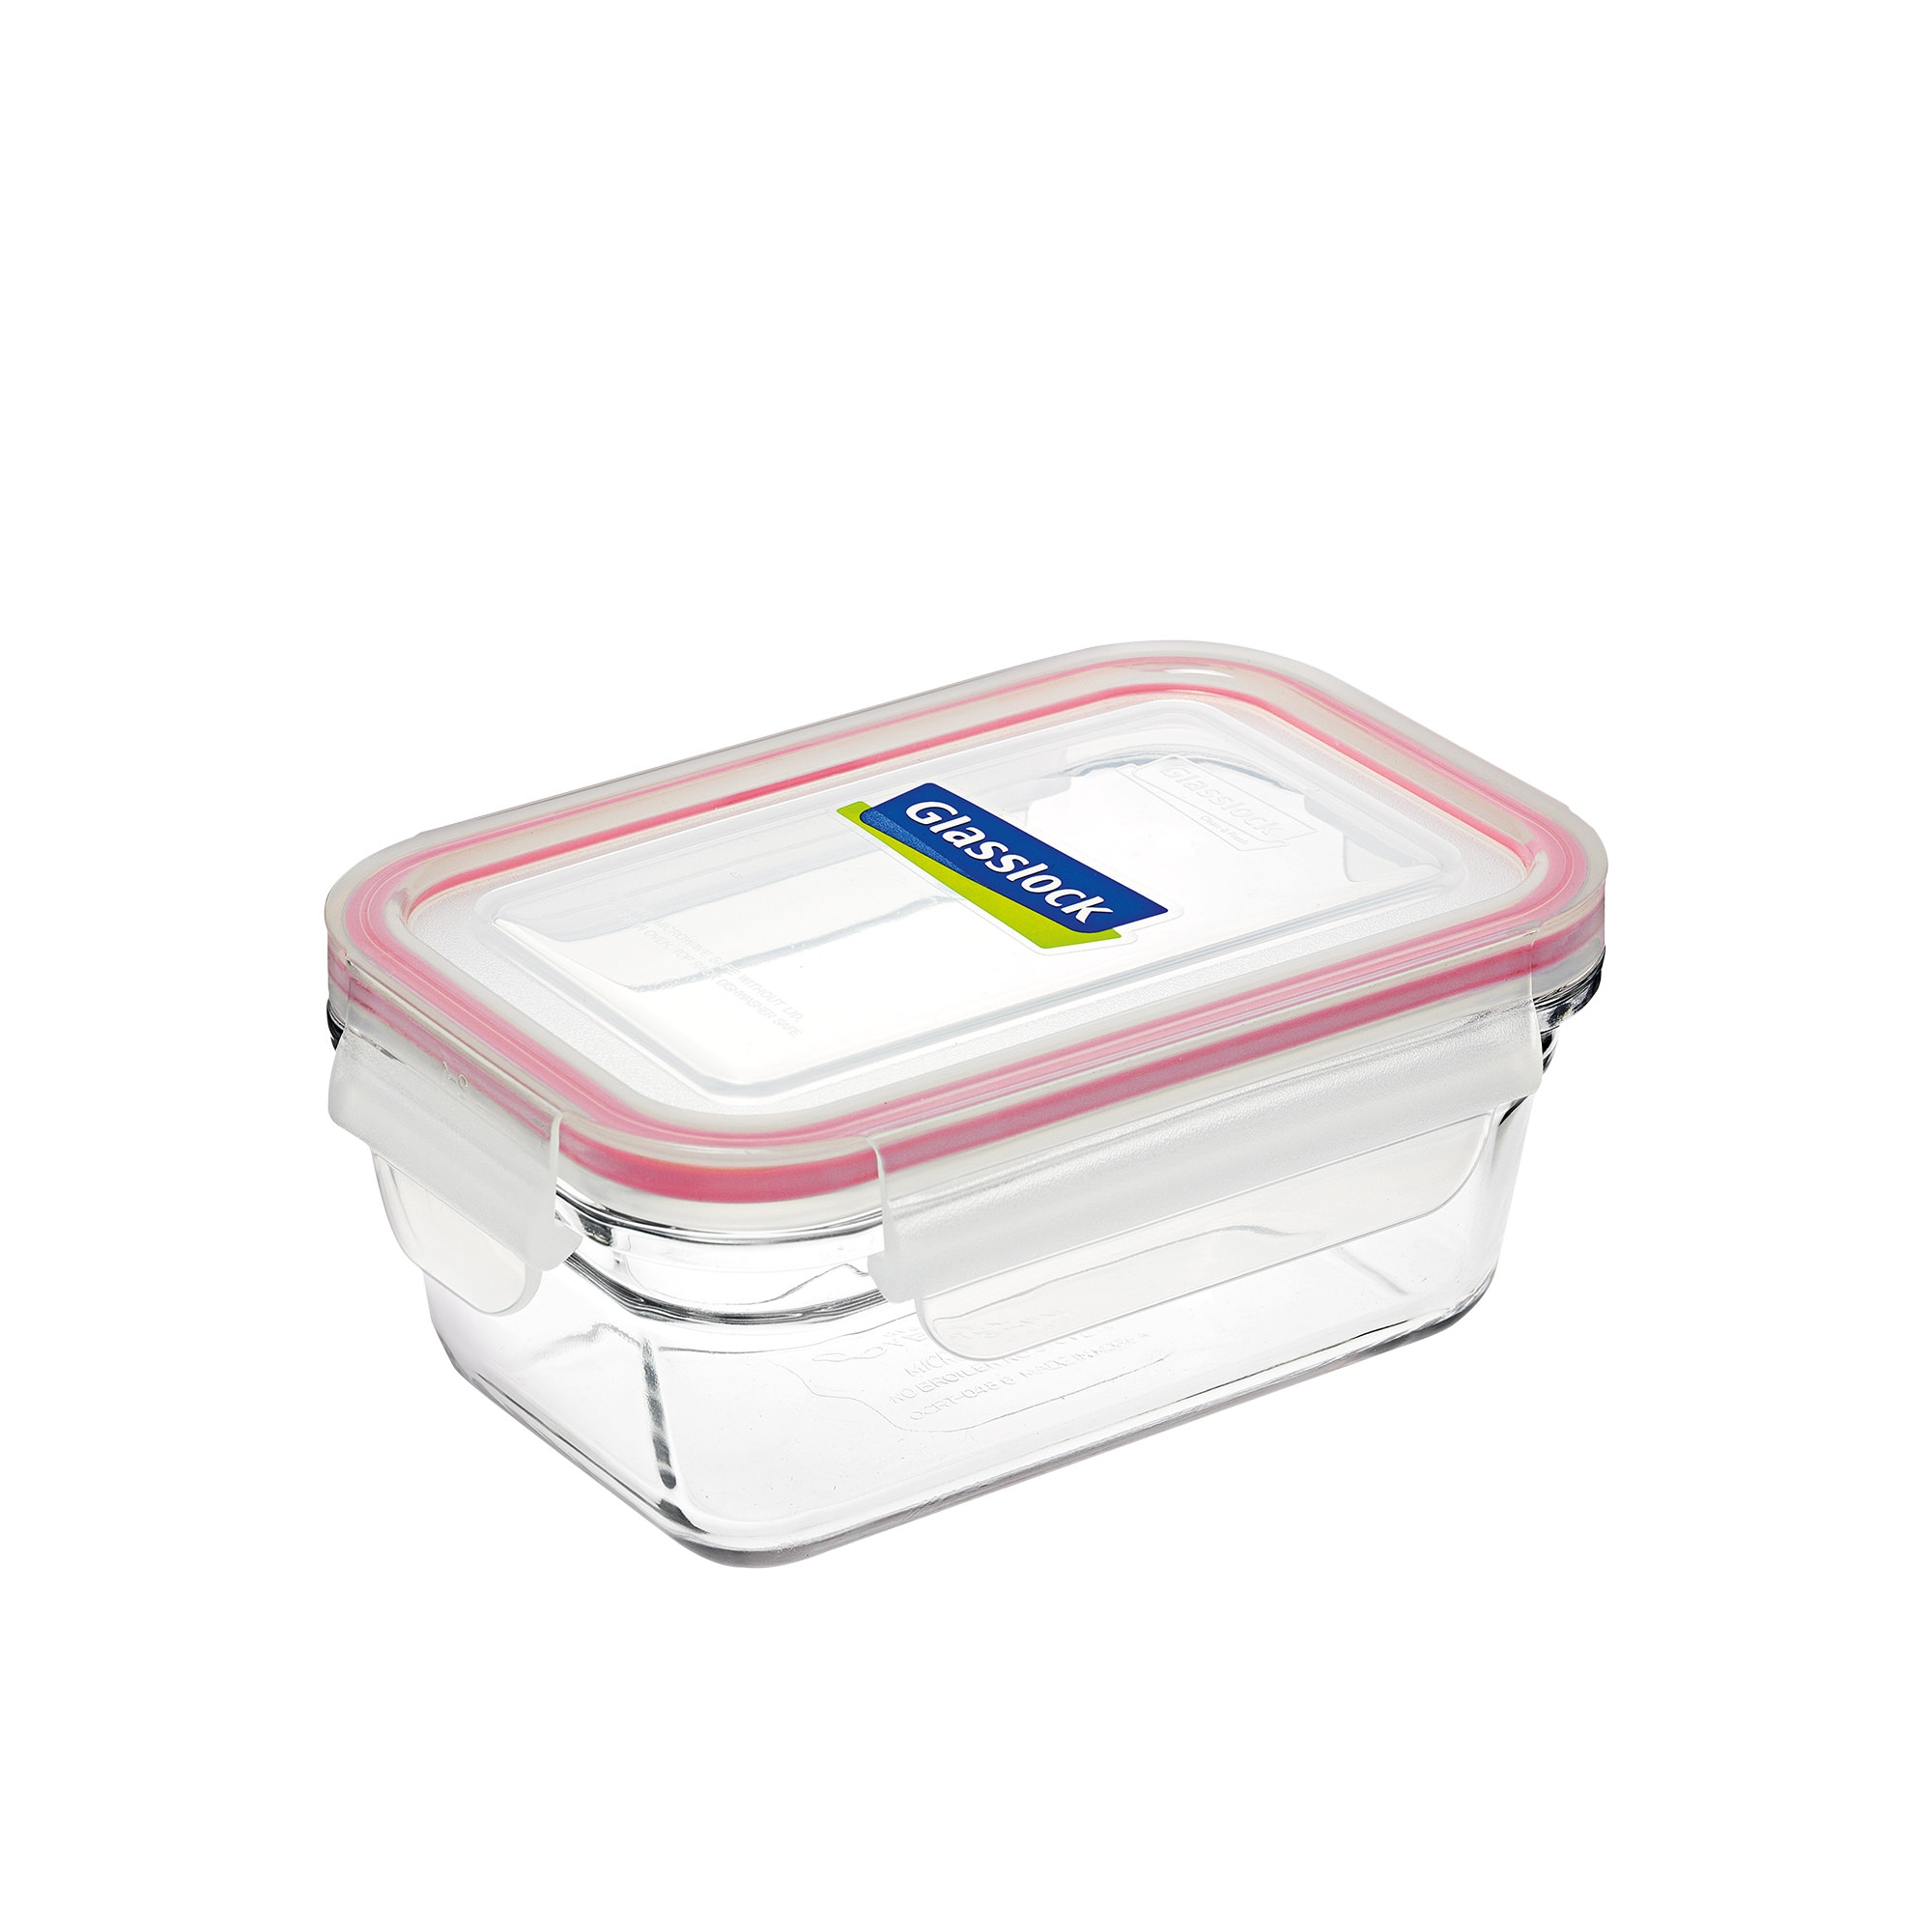 Glasslock Oven Safe Rectangular Container 485ml Image 1